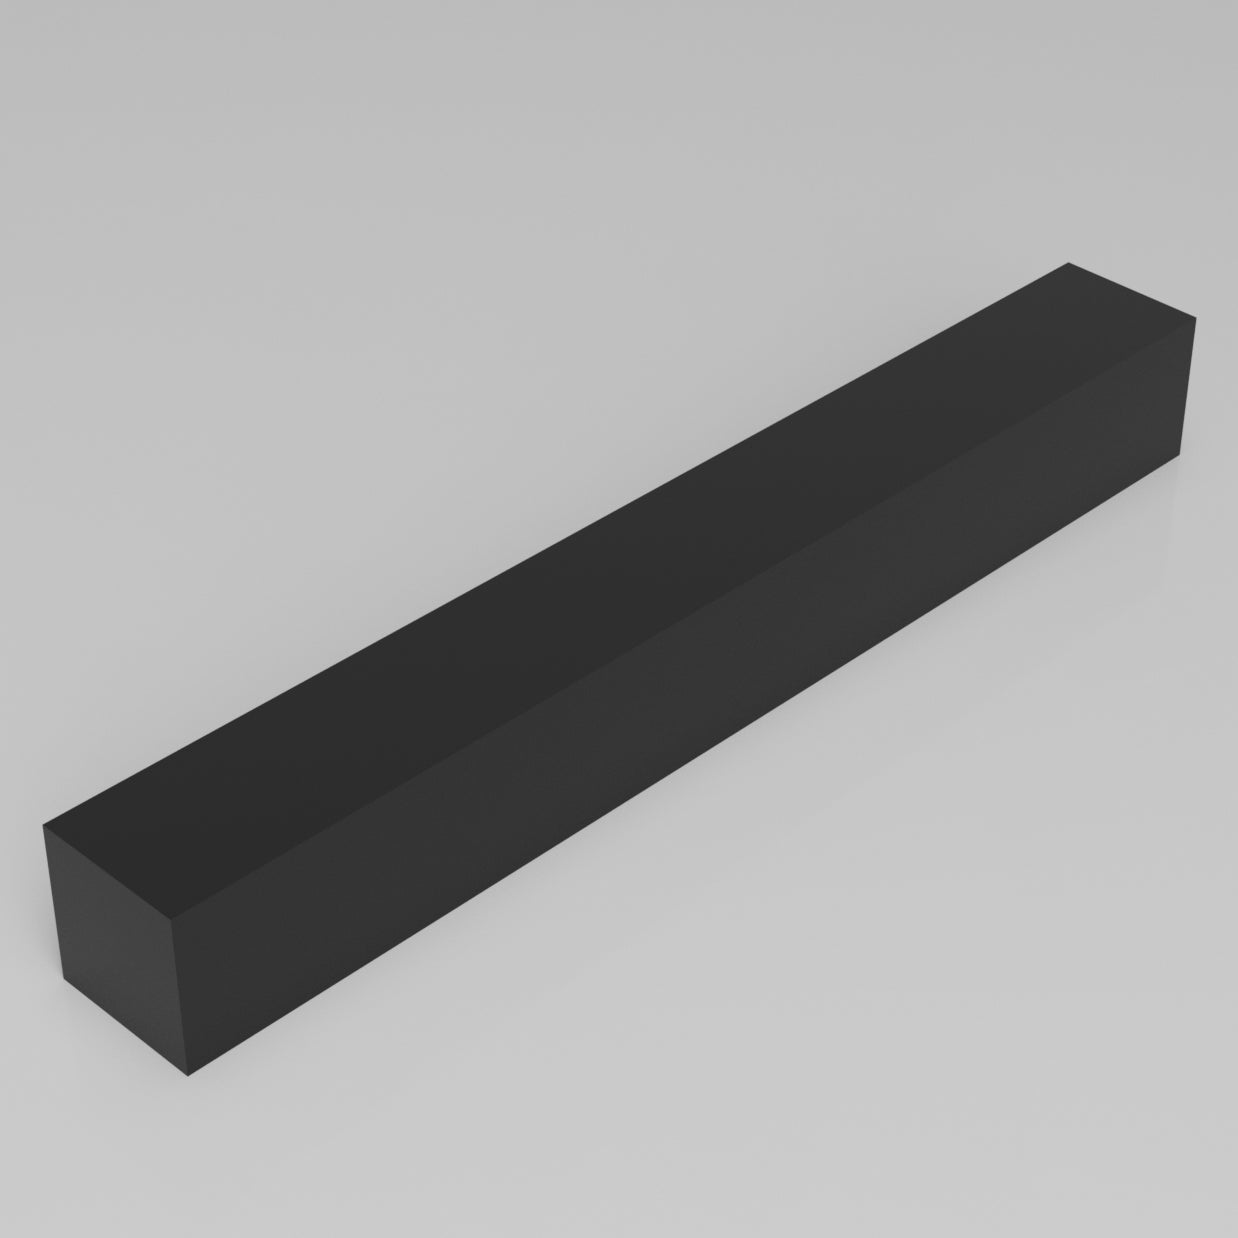 Machinable Wax Rectangular Block Front View 3 Inch by 3 Inch by 24 Inch